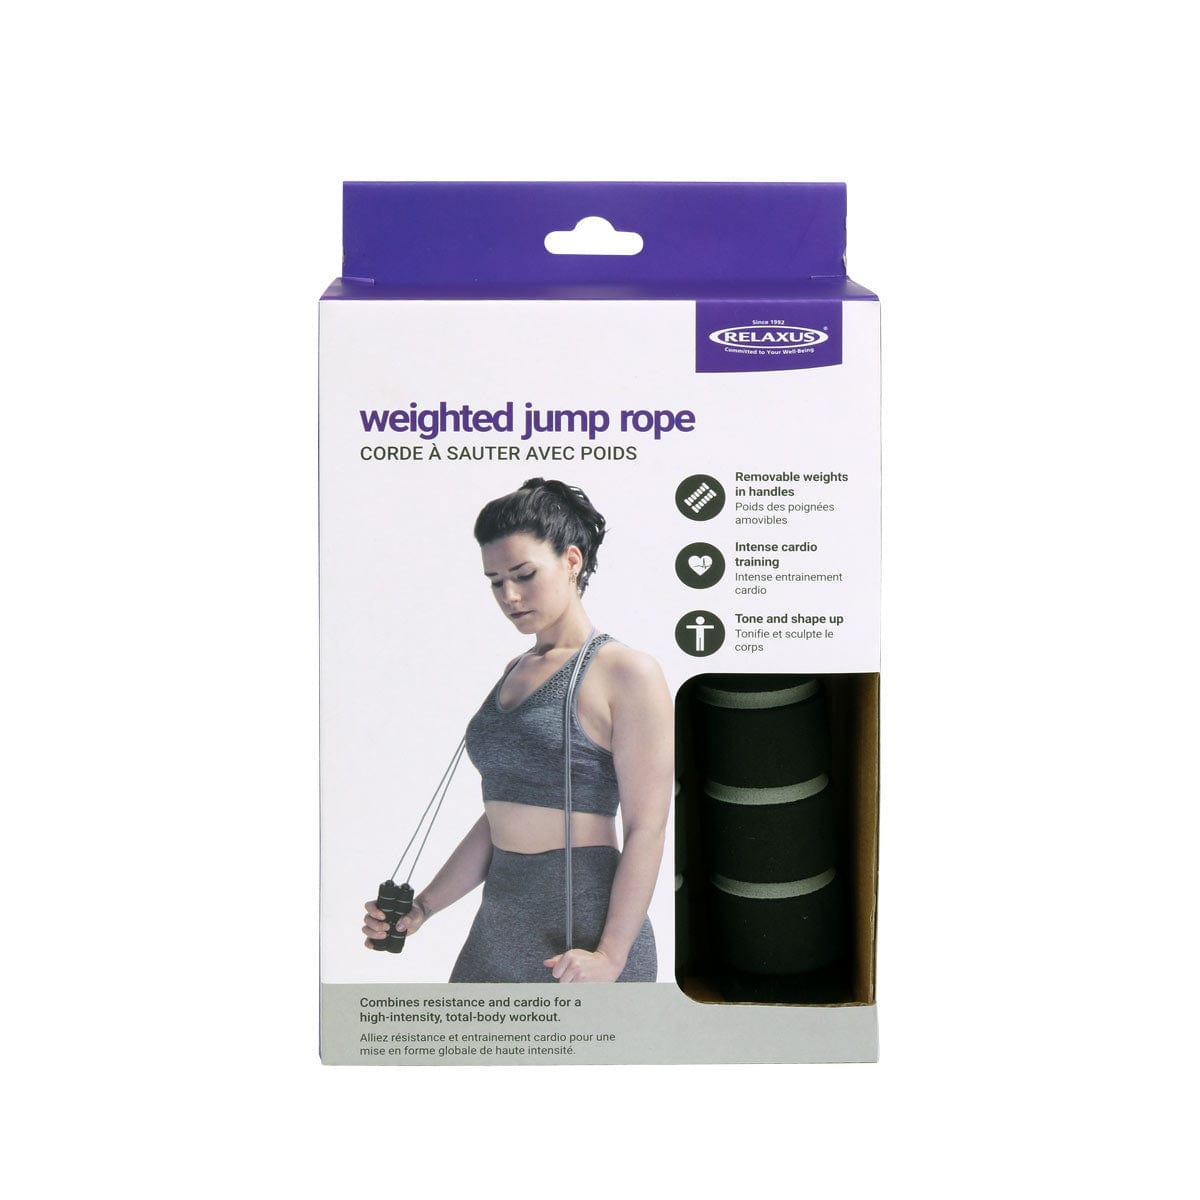 weighted jump rope box